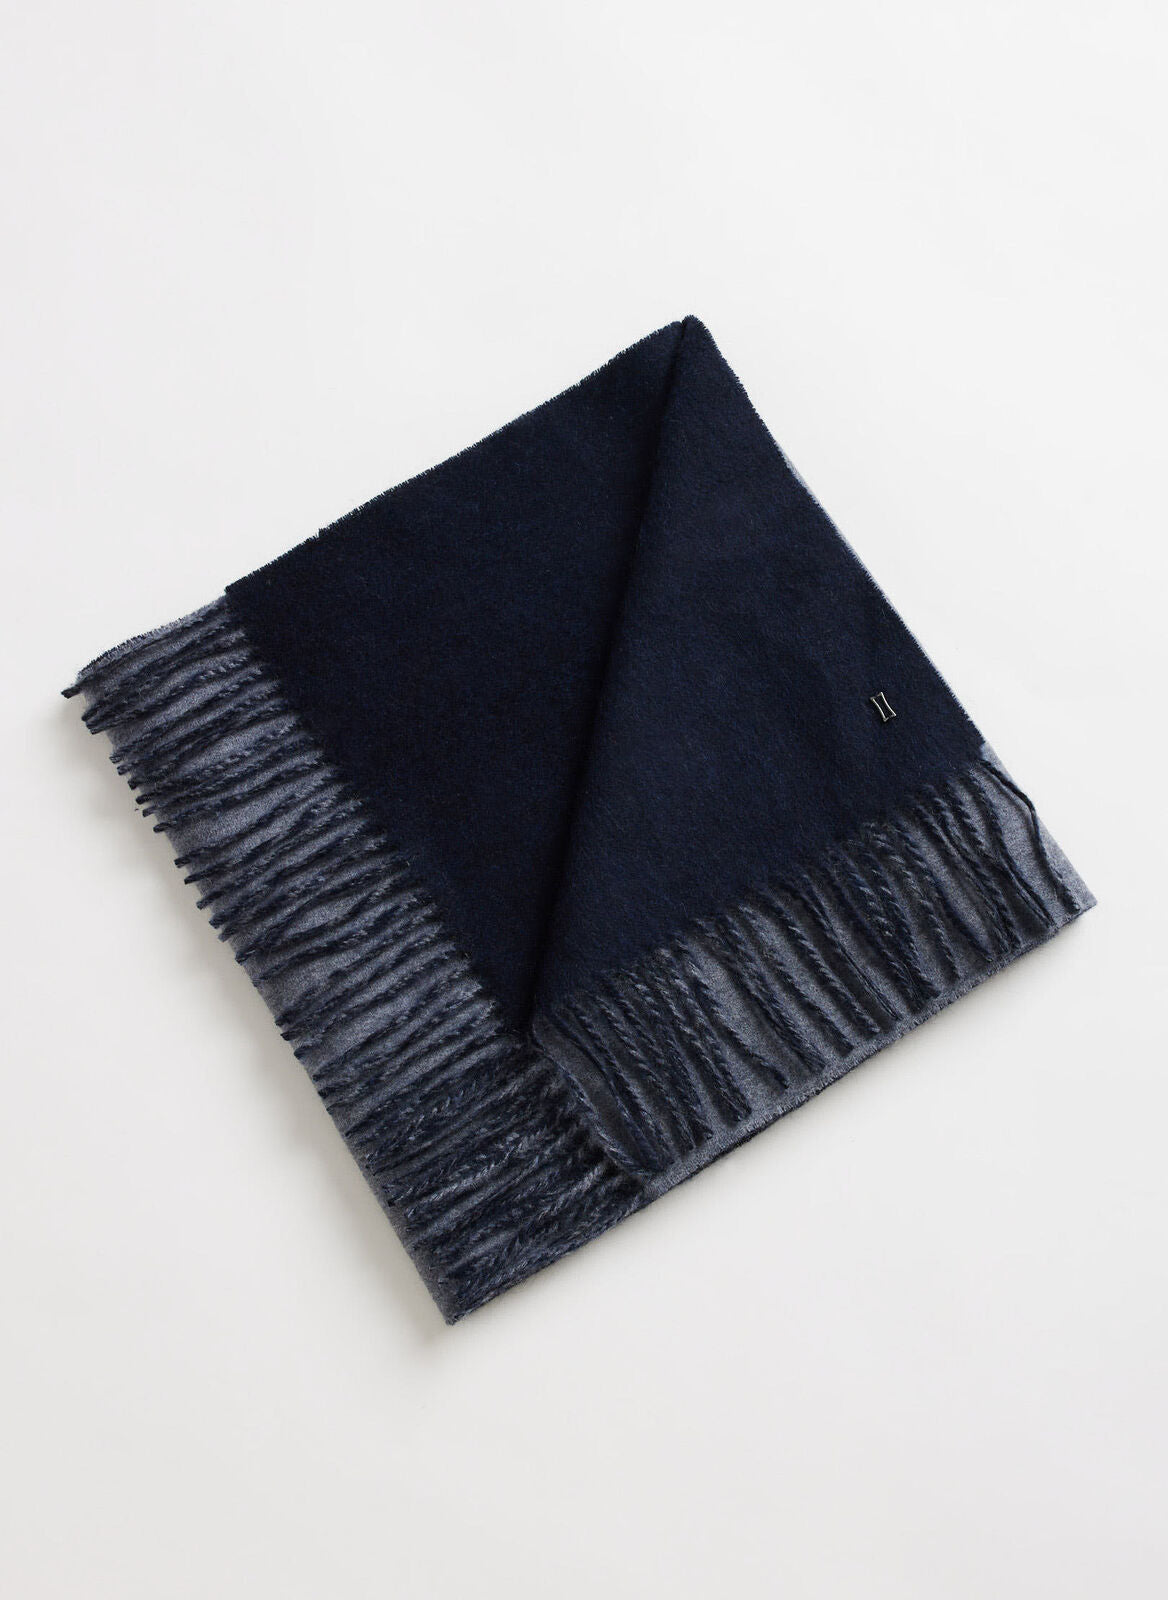 Kit and Ace — Reversible Lambs Wool Scarf